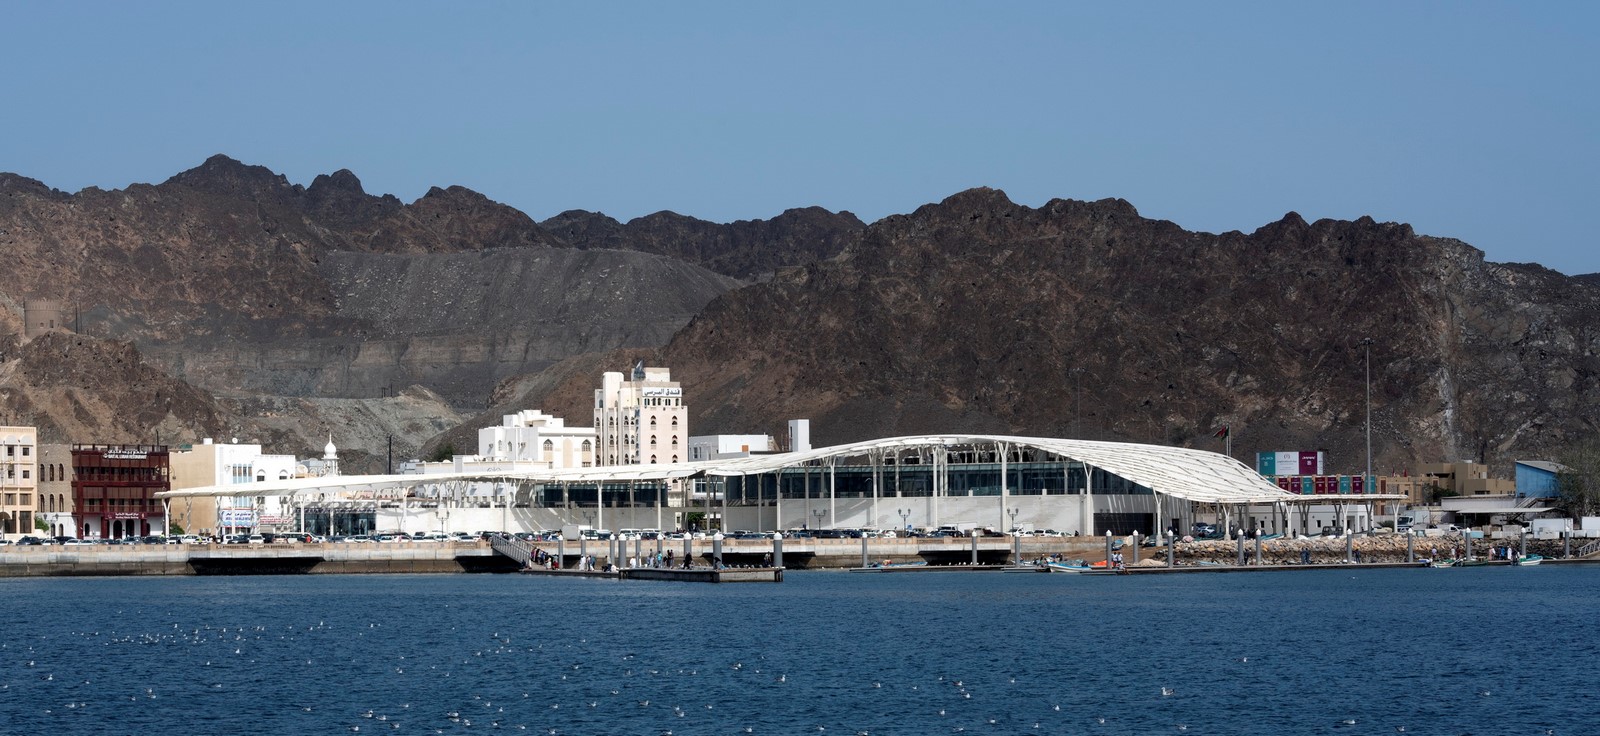 Muttrah Fish Market by Snøhetta: A tribute to Past and Future of Oman - Sheet5